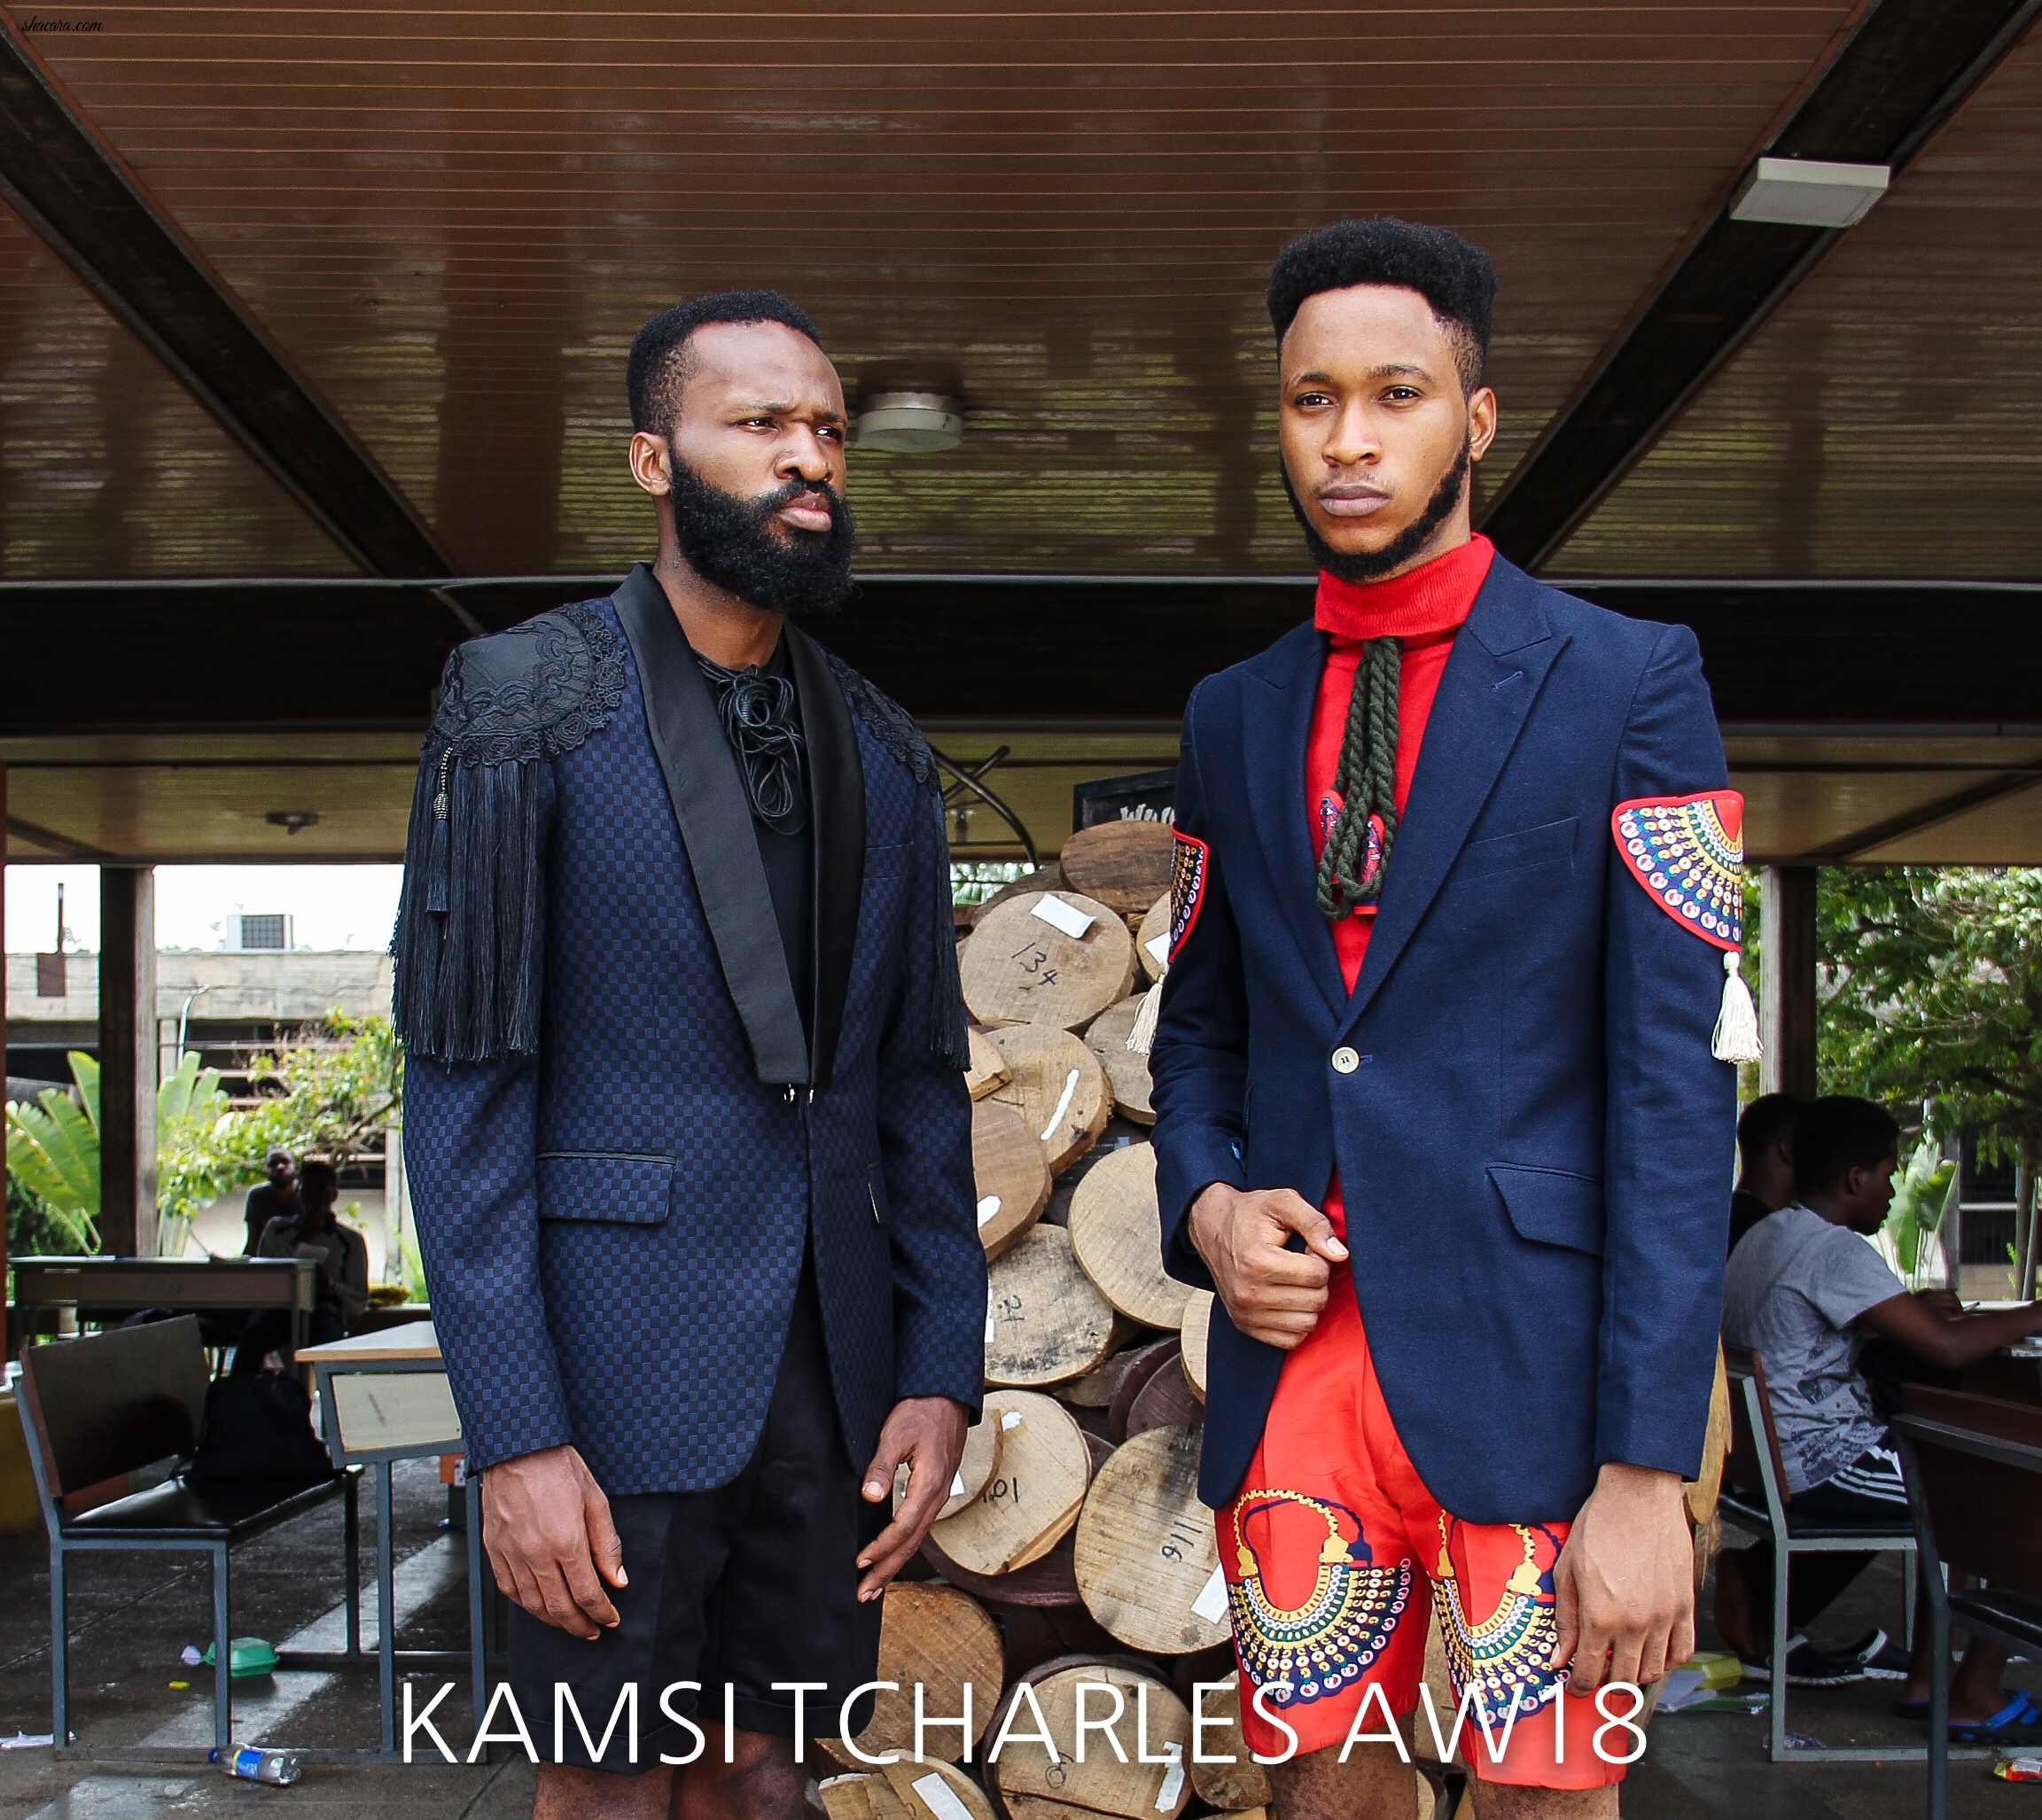 The Chronicles! Kamsi Tcharles’ Autumn Winter 18 Is Royal & Powerful